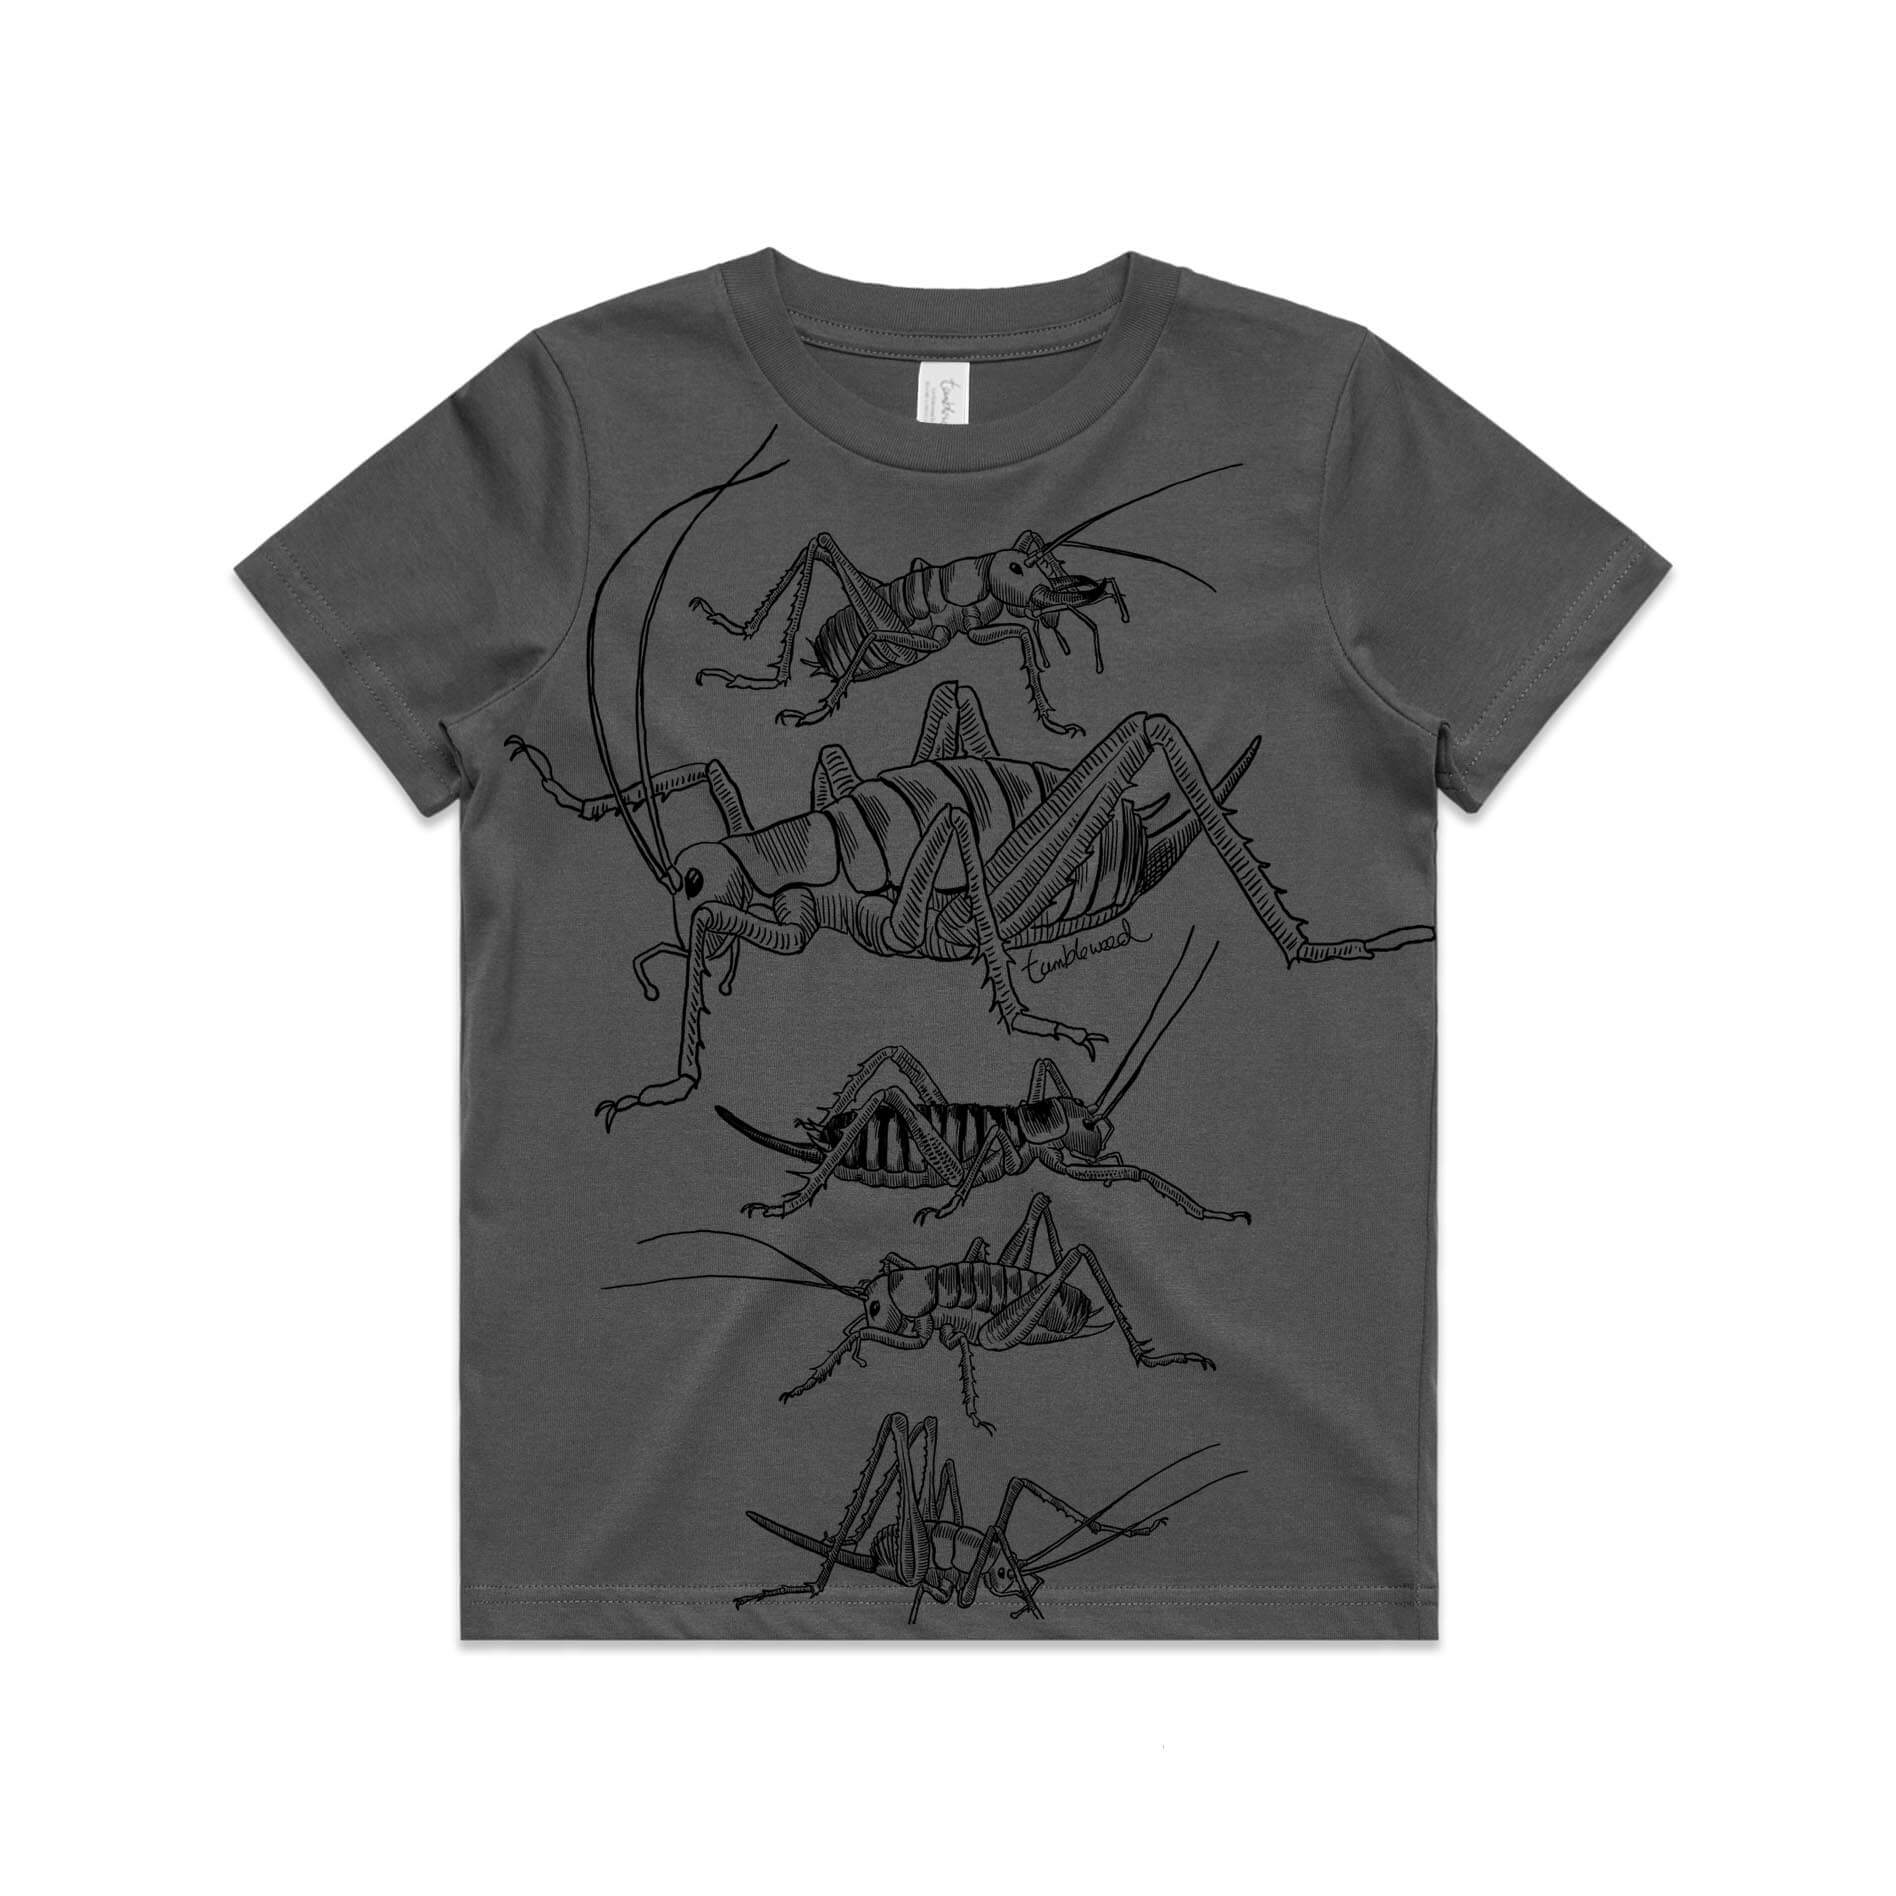 Charcoal, cotton kids' t-shirt with screen printed weta design.